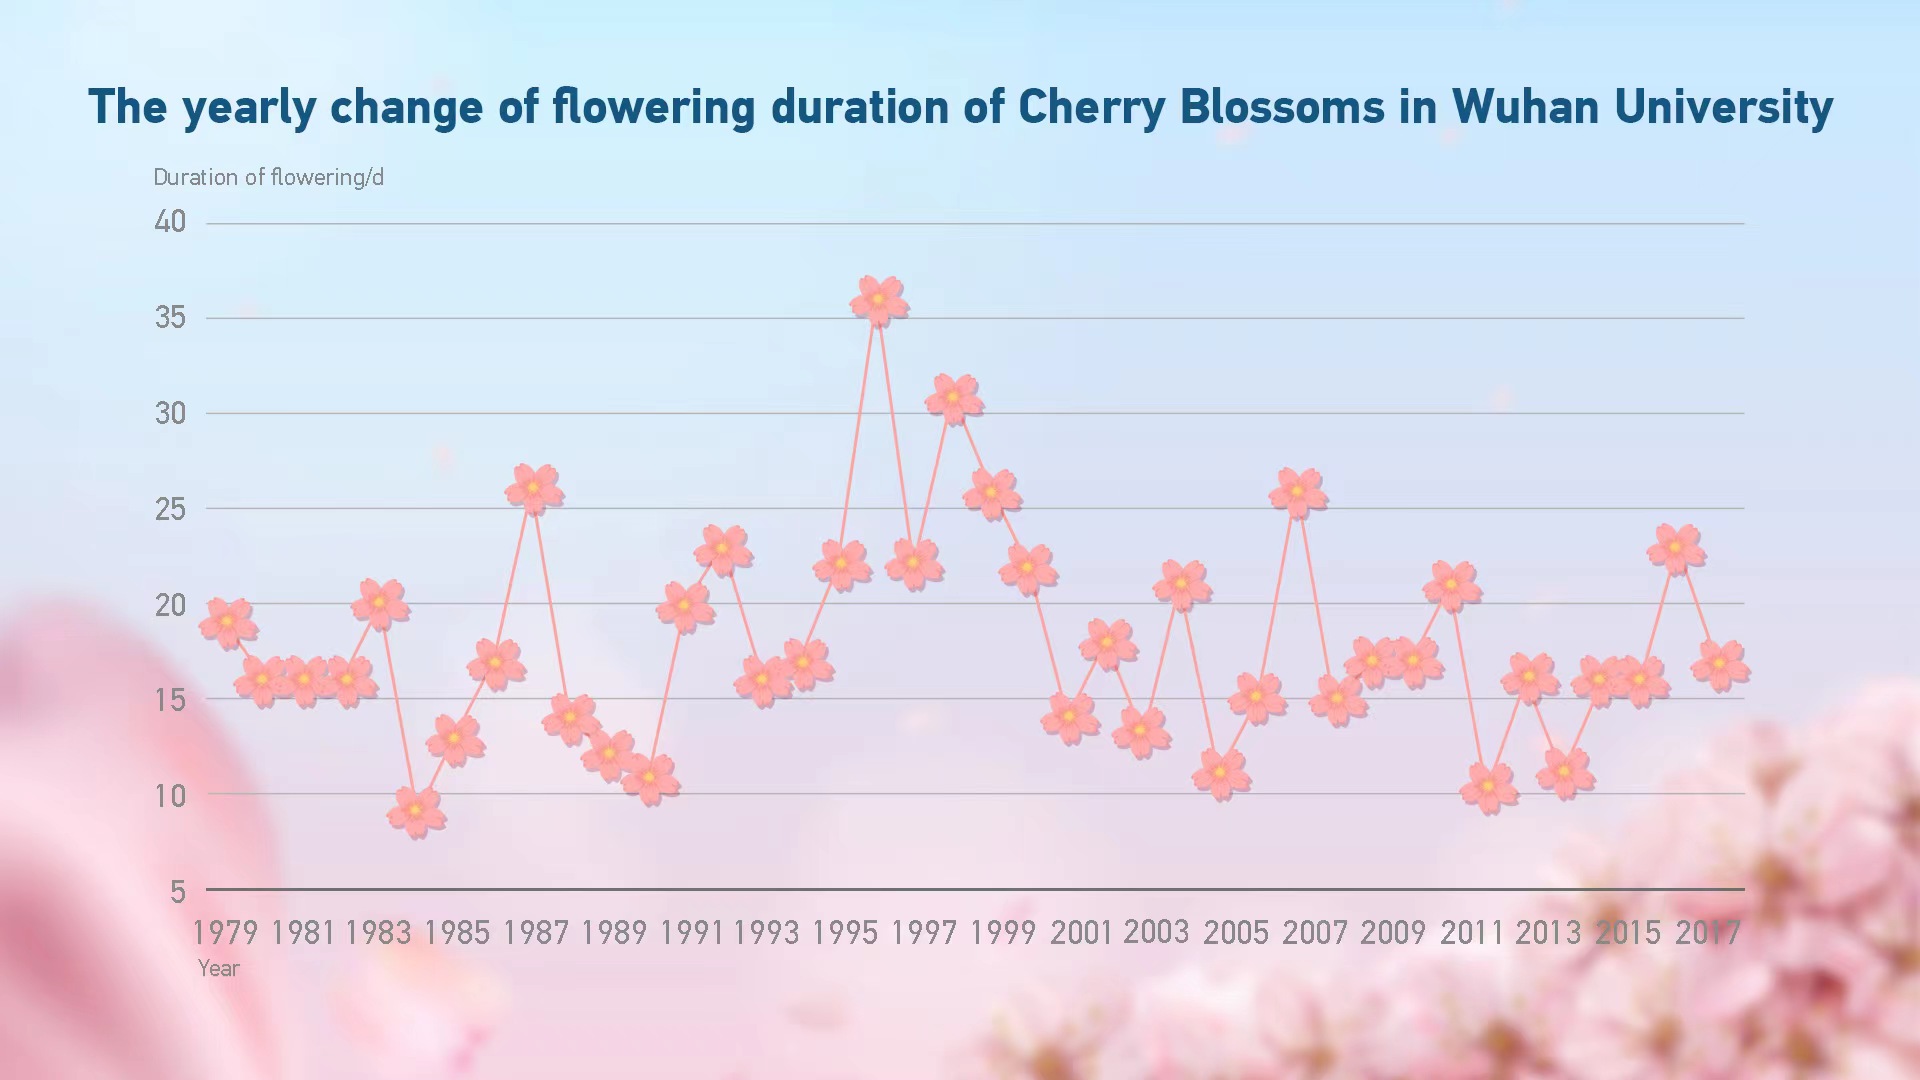 The yearly change of flowering duration of cherry blossoms in Wuhan University and its linear fitting (1979—2018). /Tan Jing